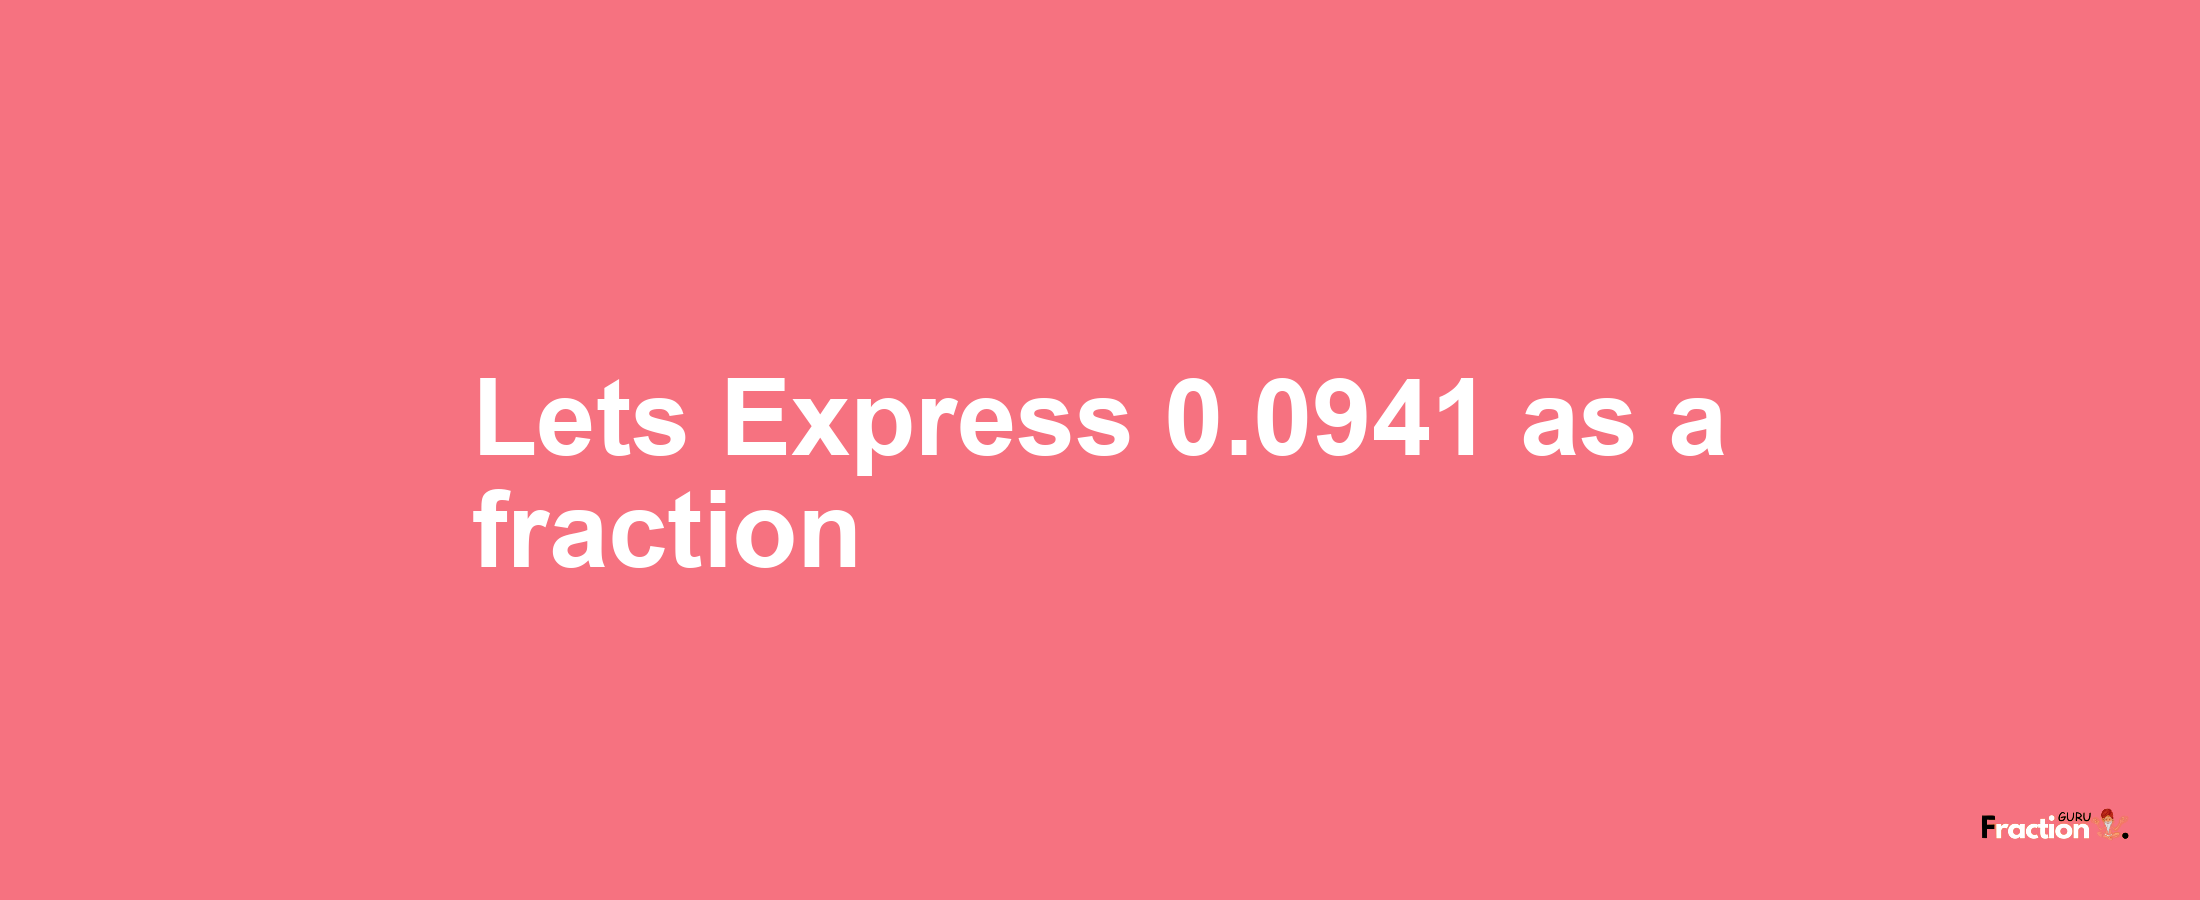 Lets Express 0.0941 as afraction